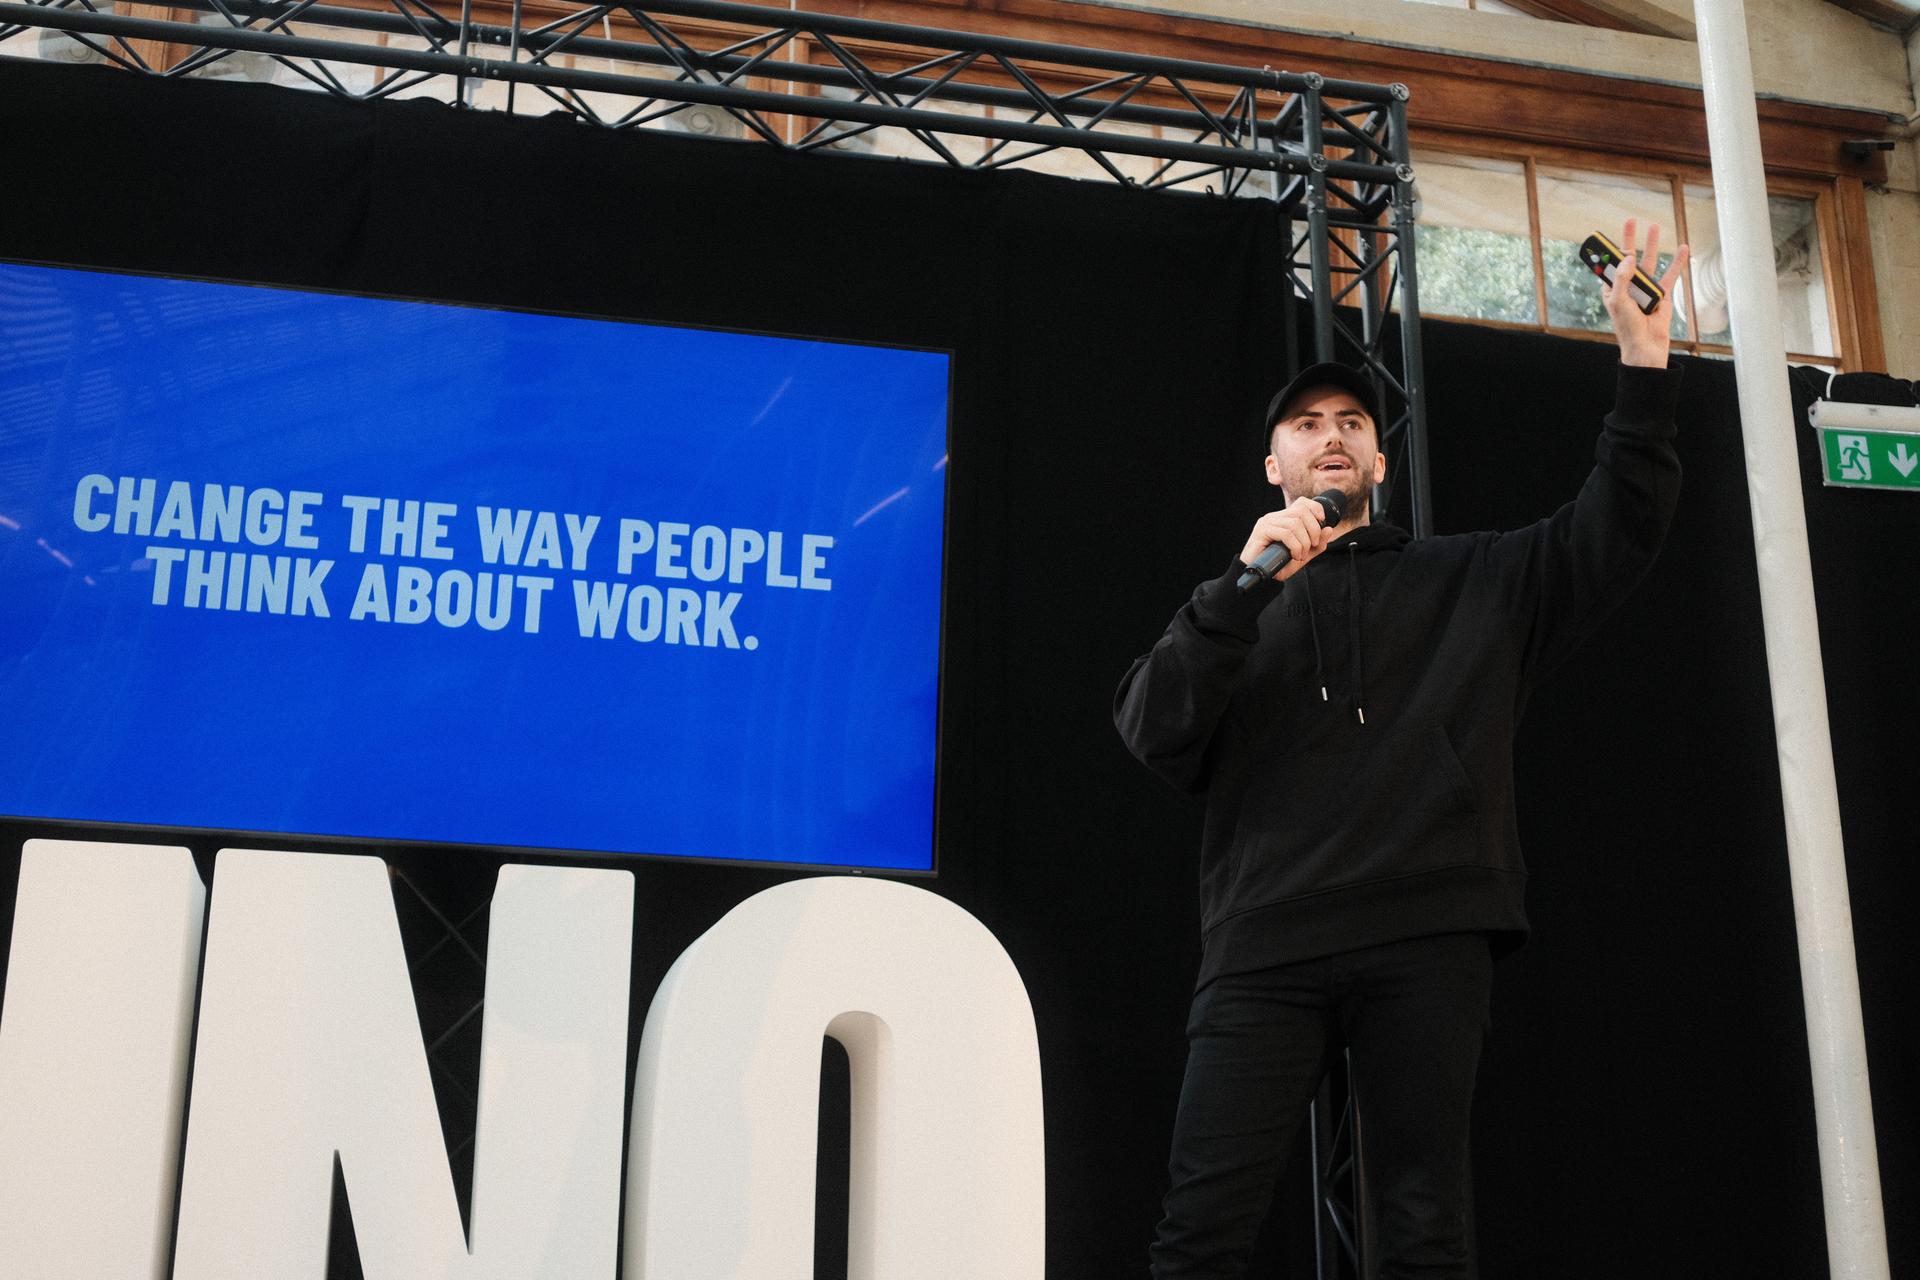 Man on stage with mic talking about changing the way people think about work